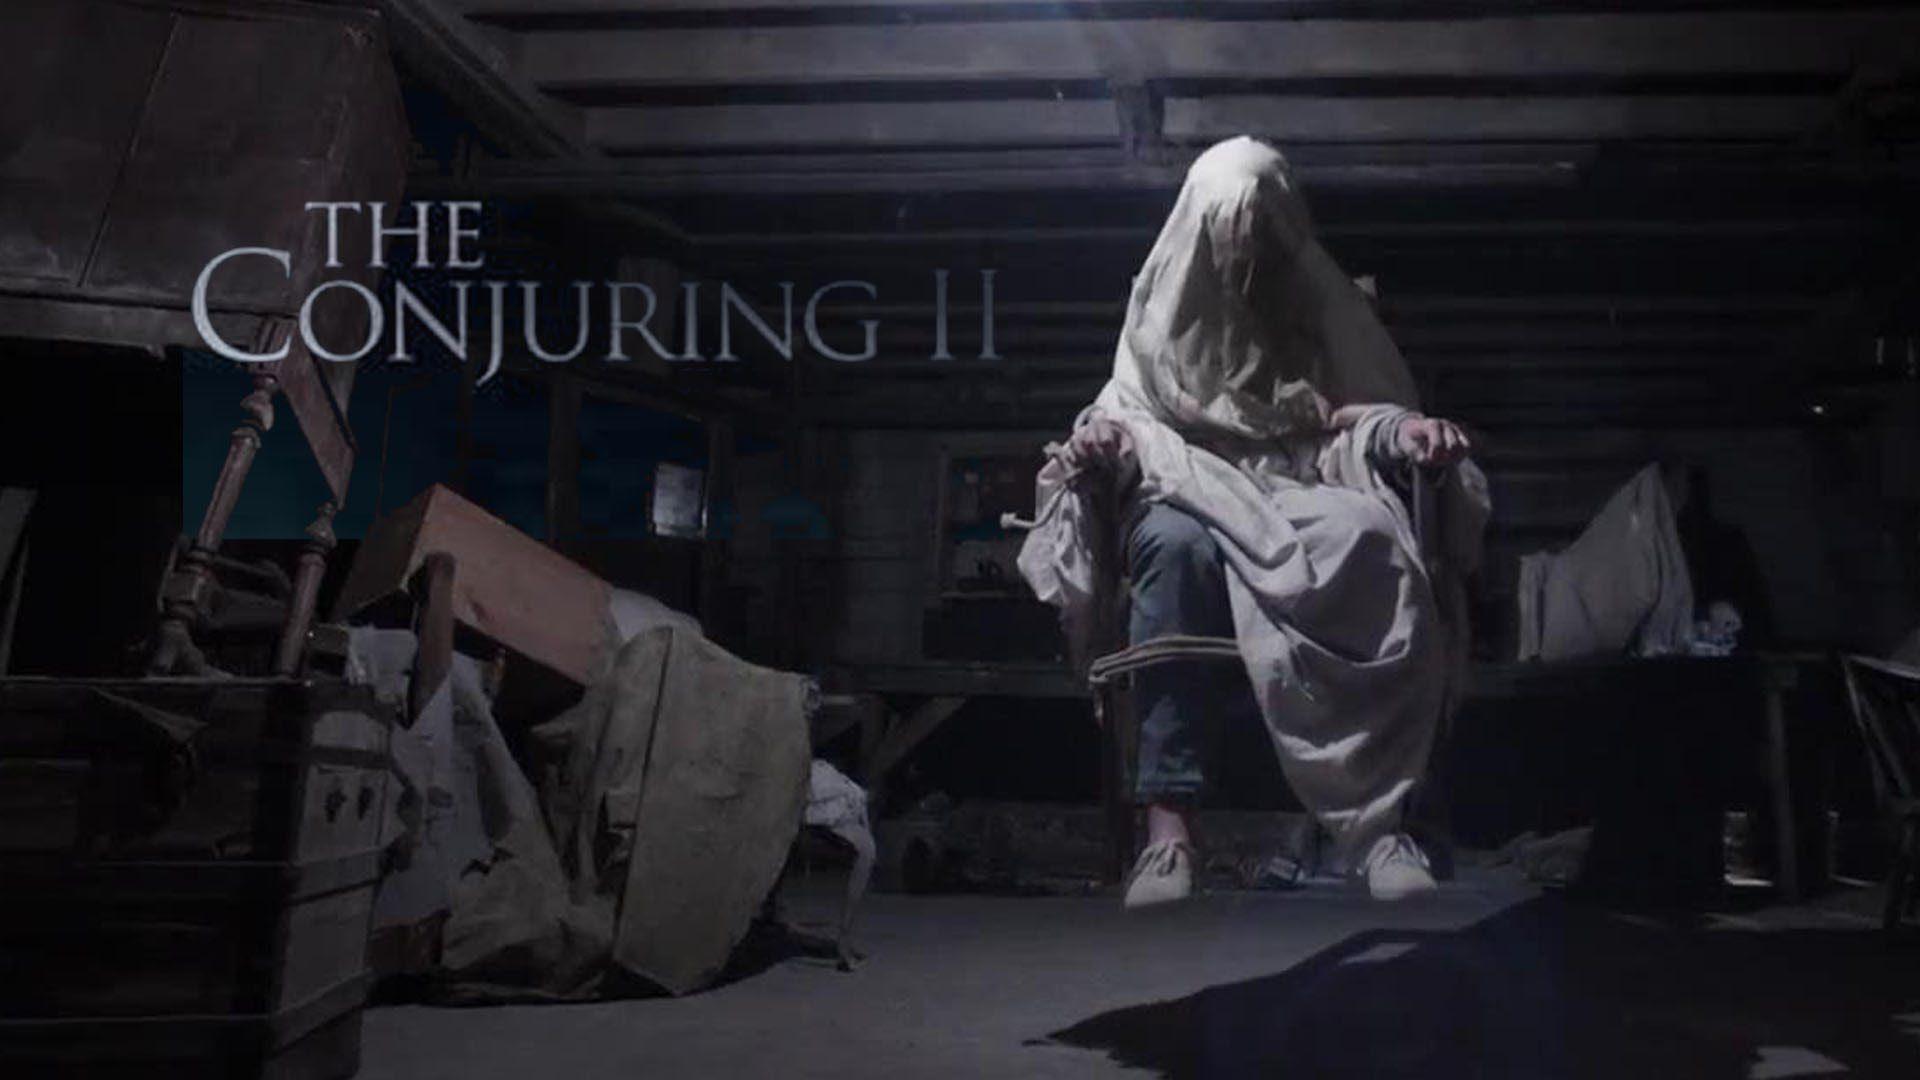 New Release Date Set For THE CONJURING 2